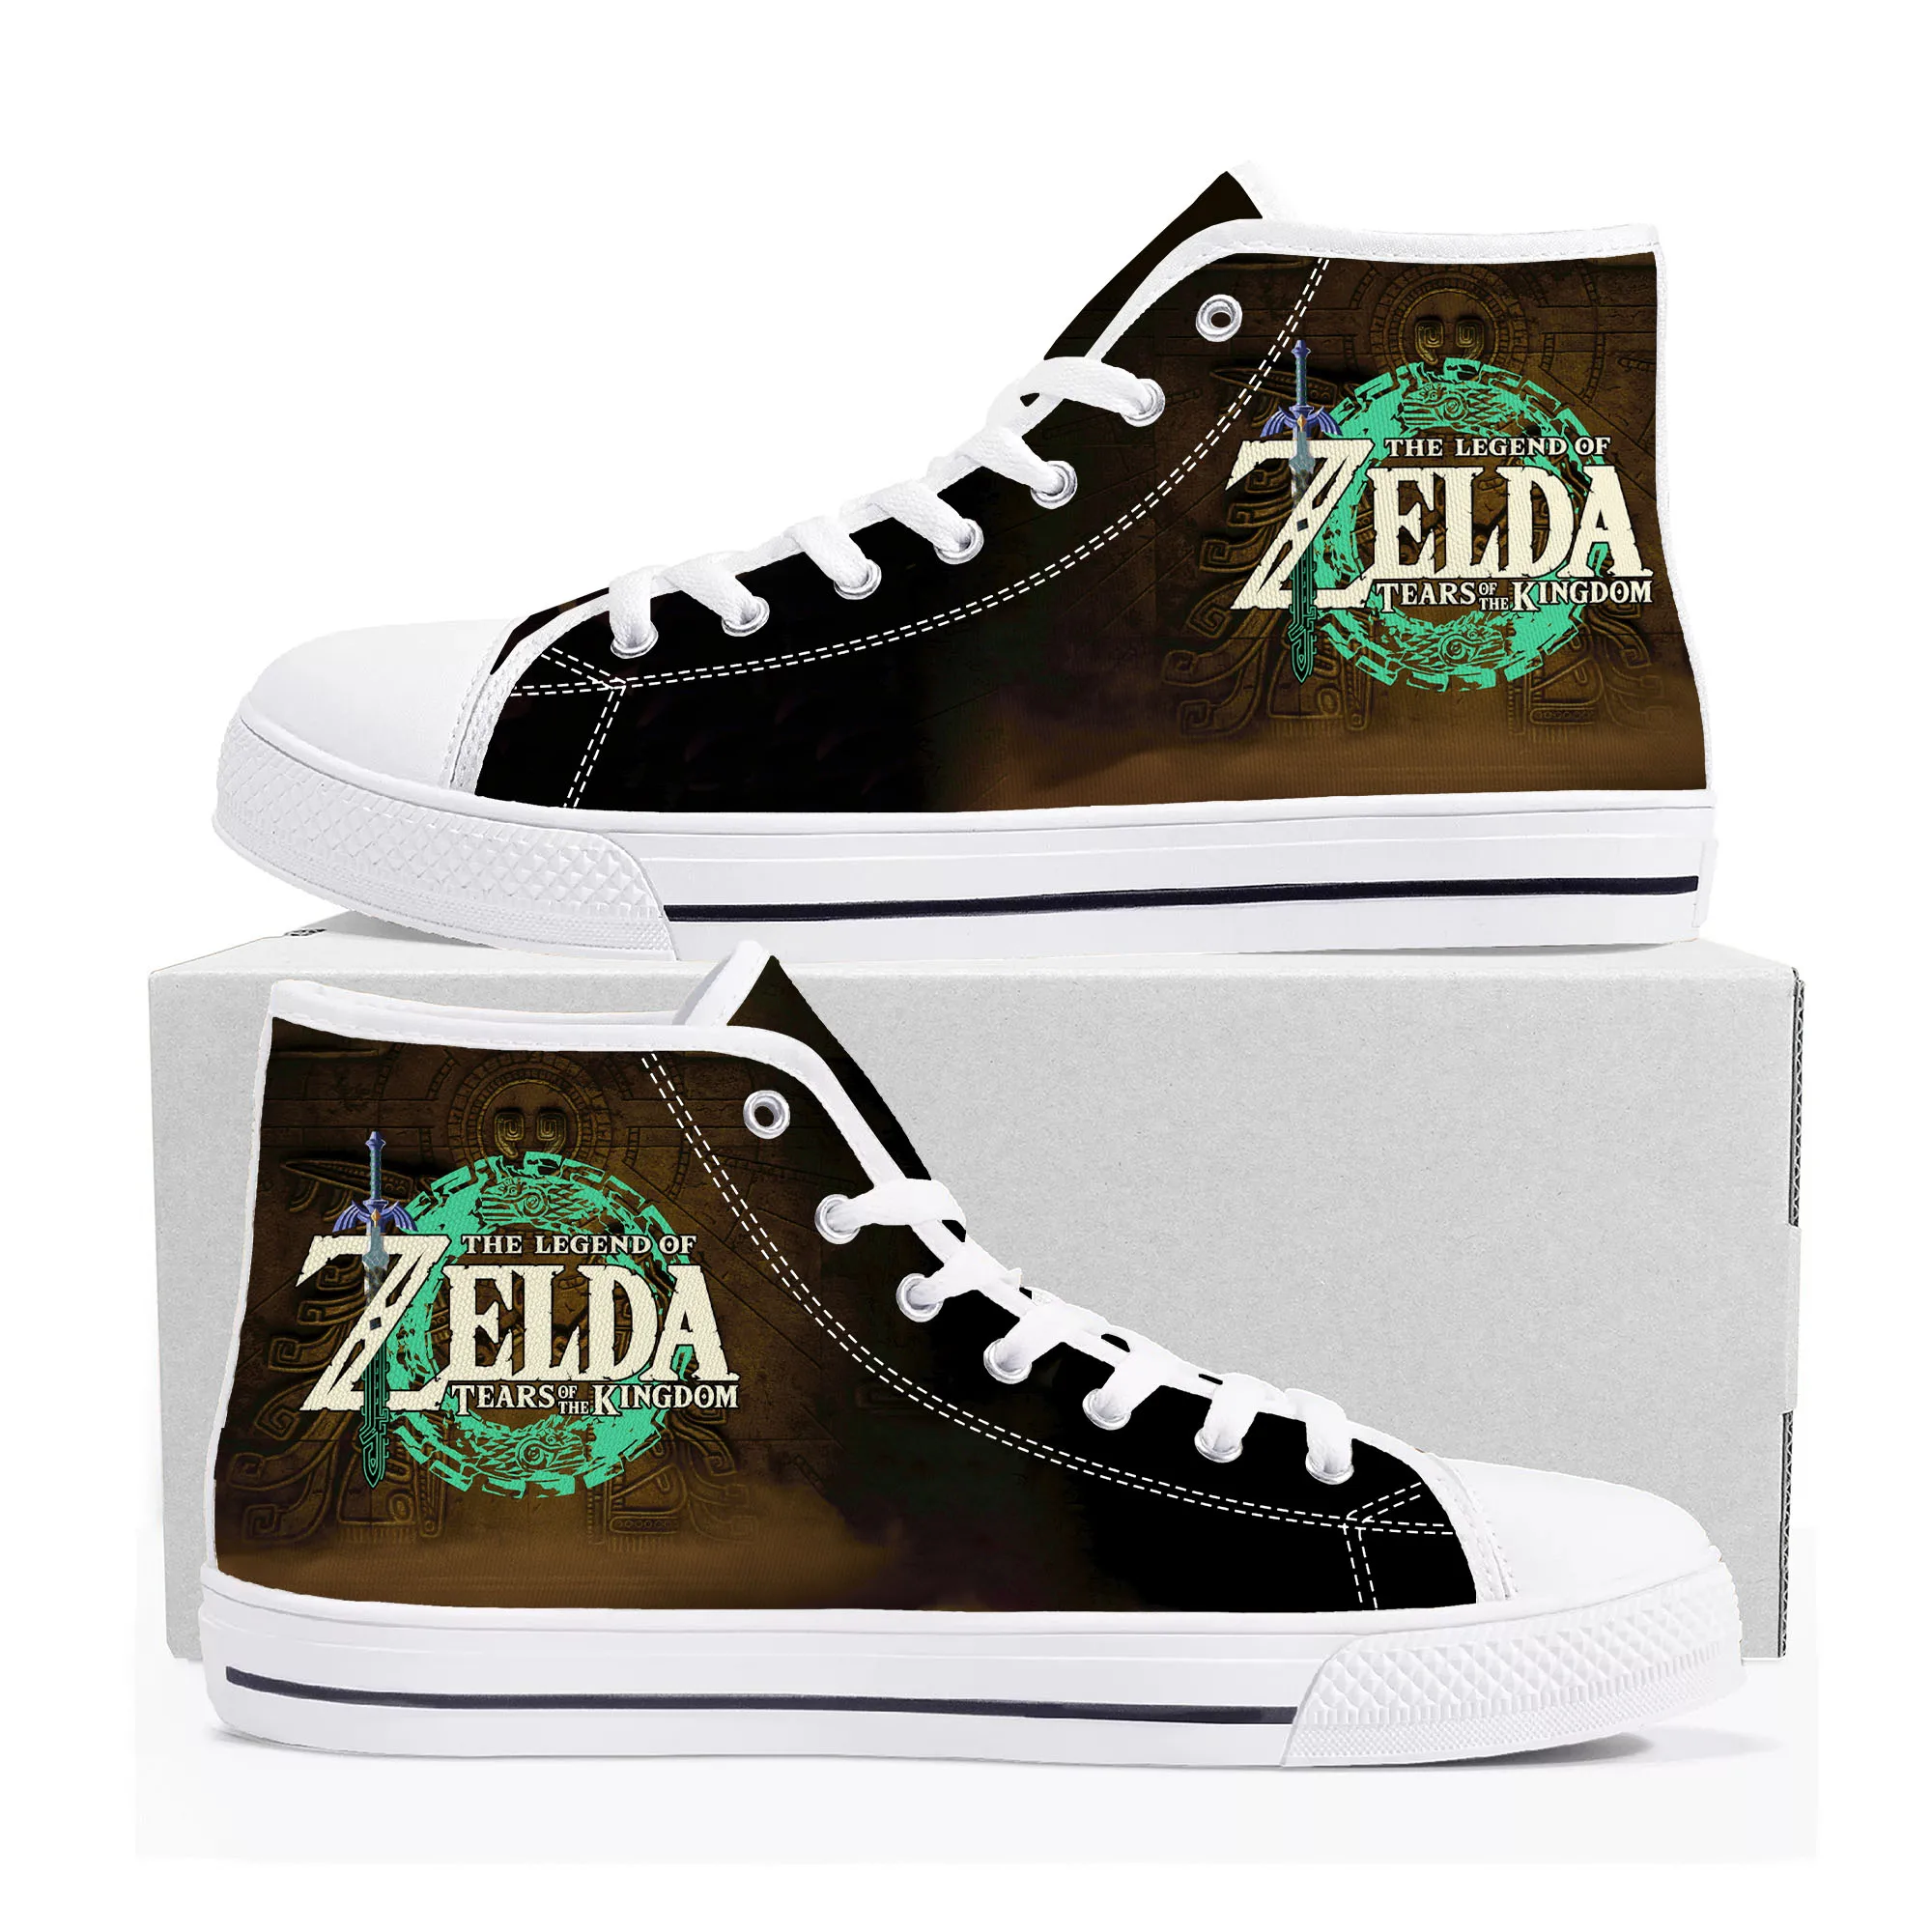 

Zeldas Japanese Game High Top Sneakers Mens Womens Teenager High Quality Canvas Sneaker couple Casual Shoe Customize Shoes